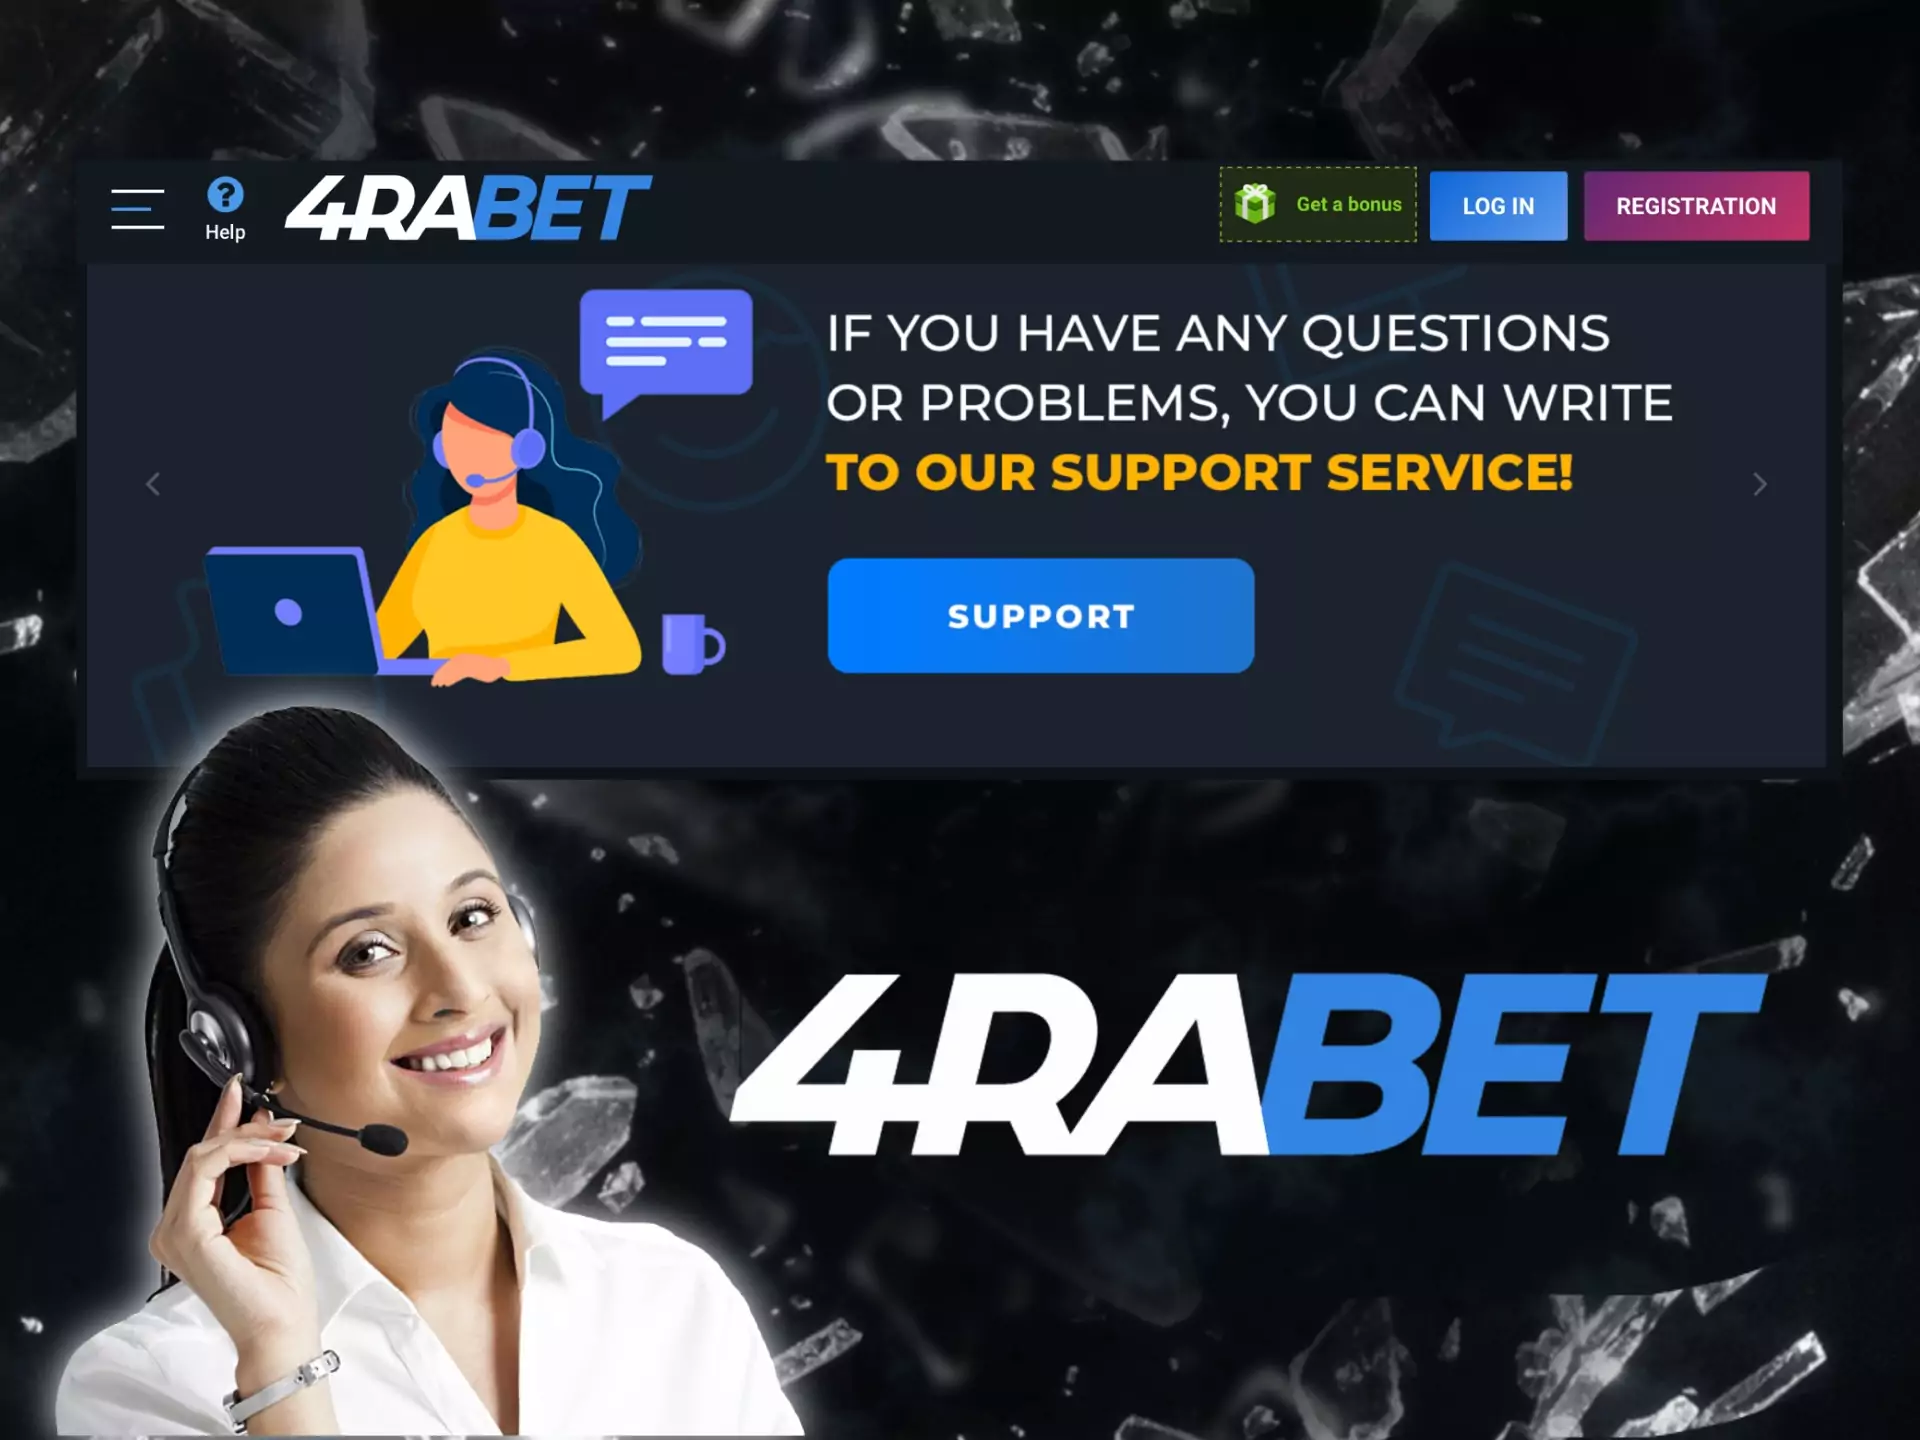 You can cotact 4rabet's support team whenever you have a question.